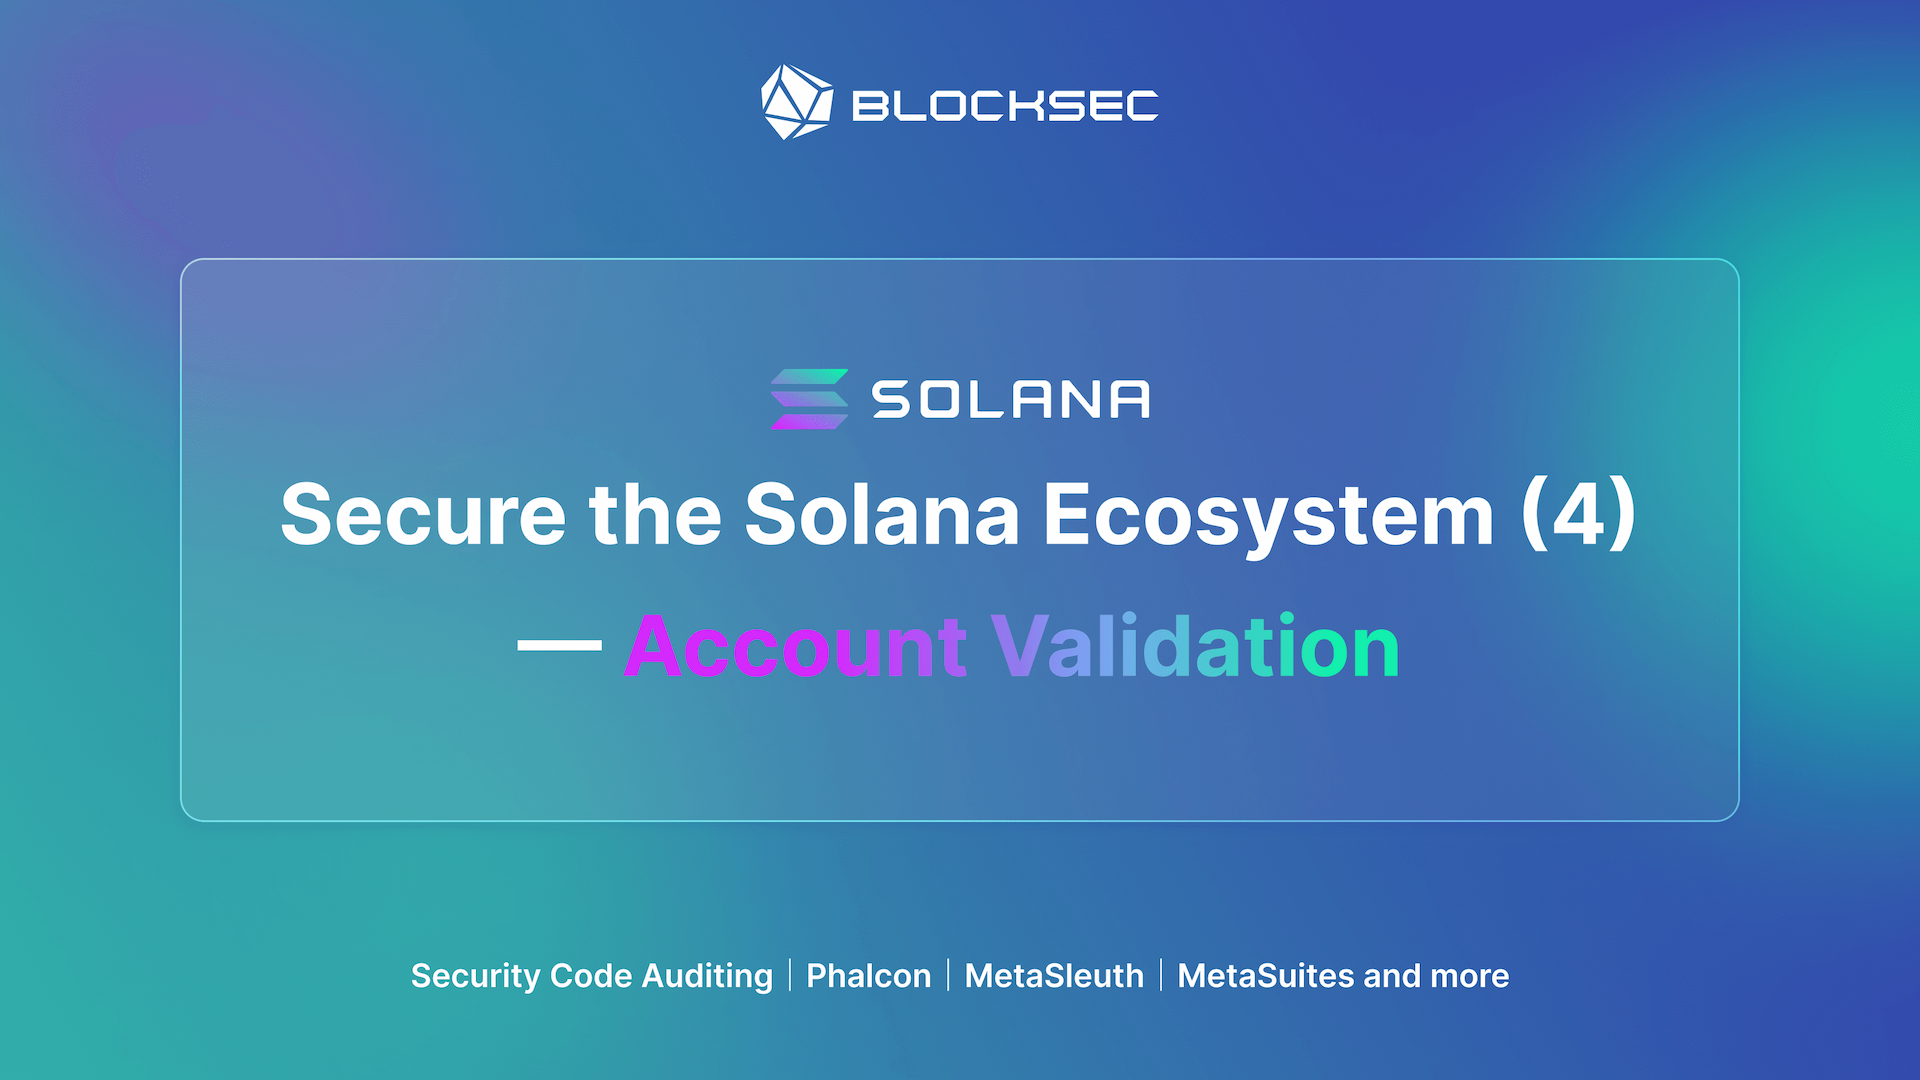 Secure the Solana Ecosystem (4) — Account Validation